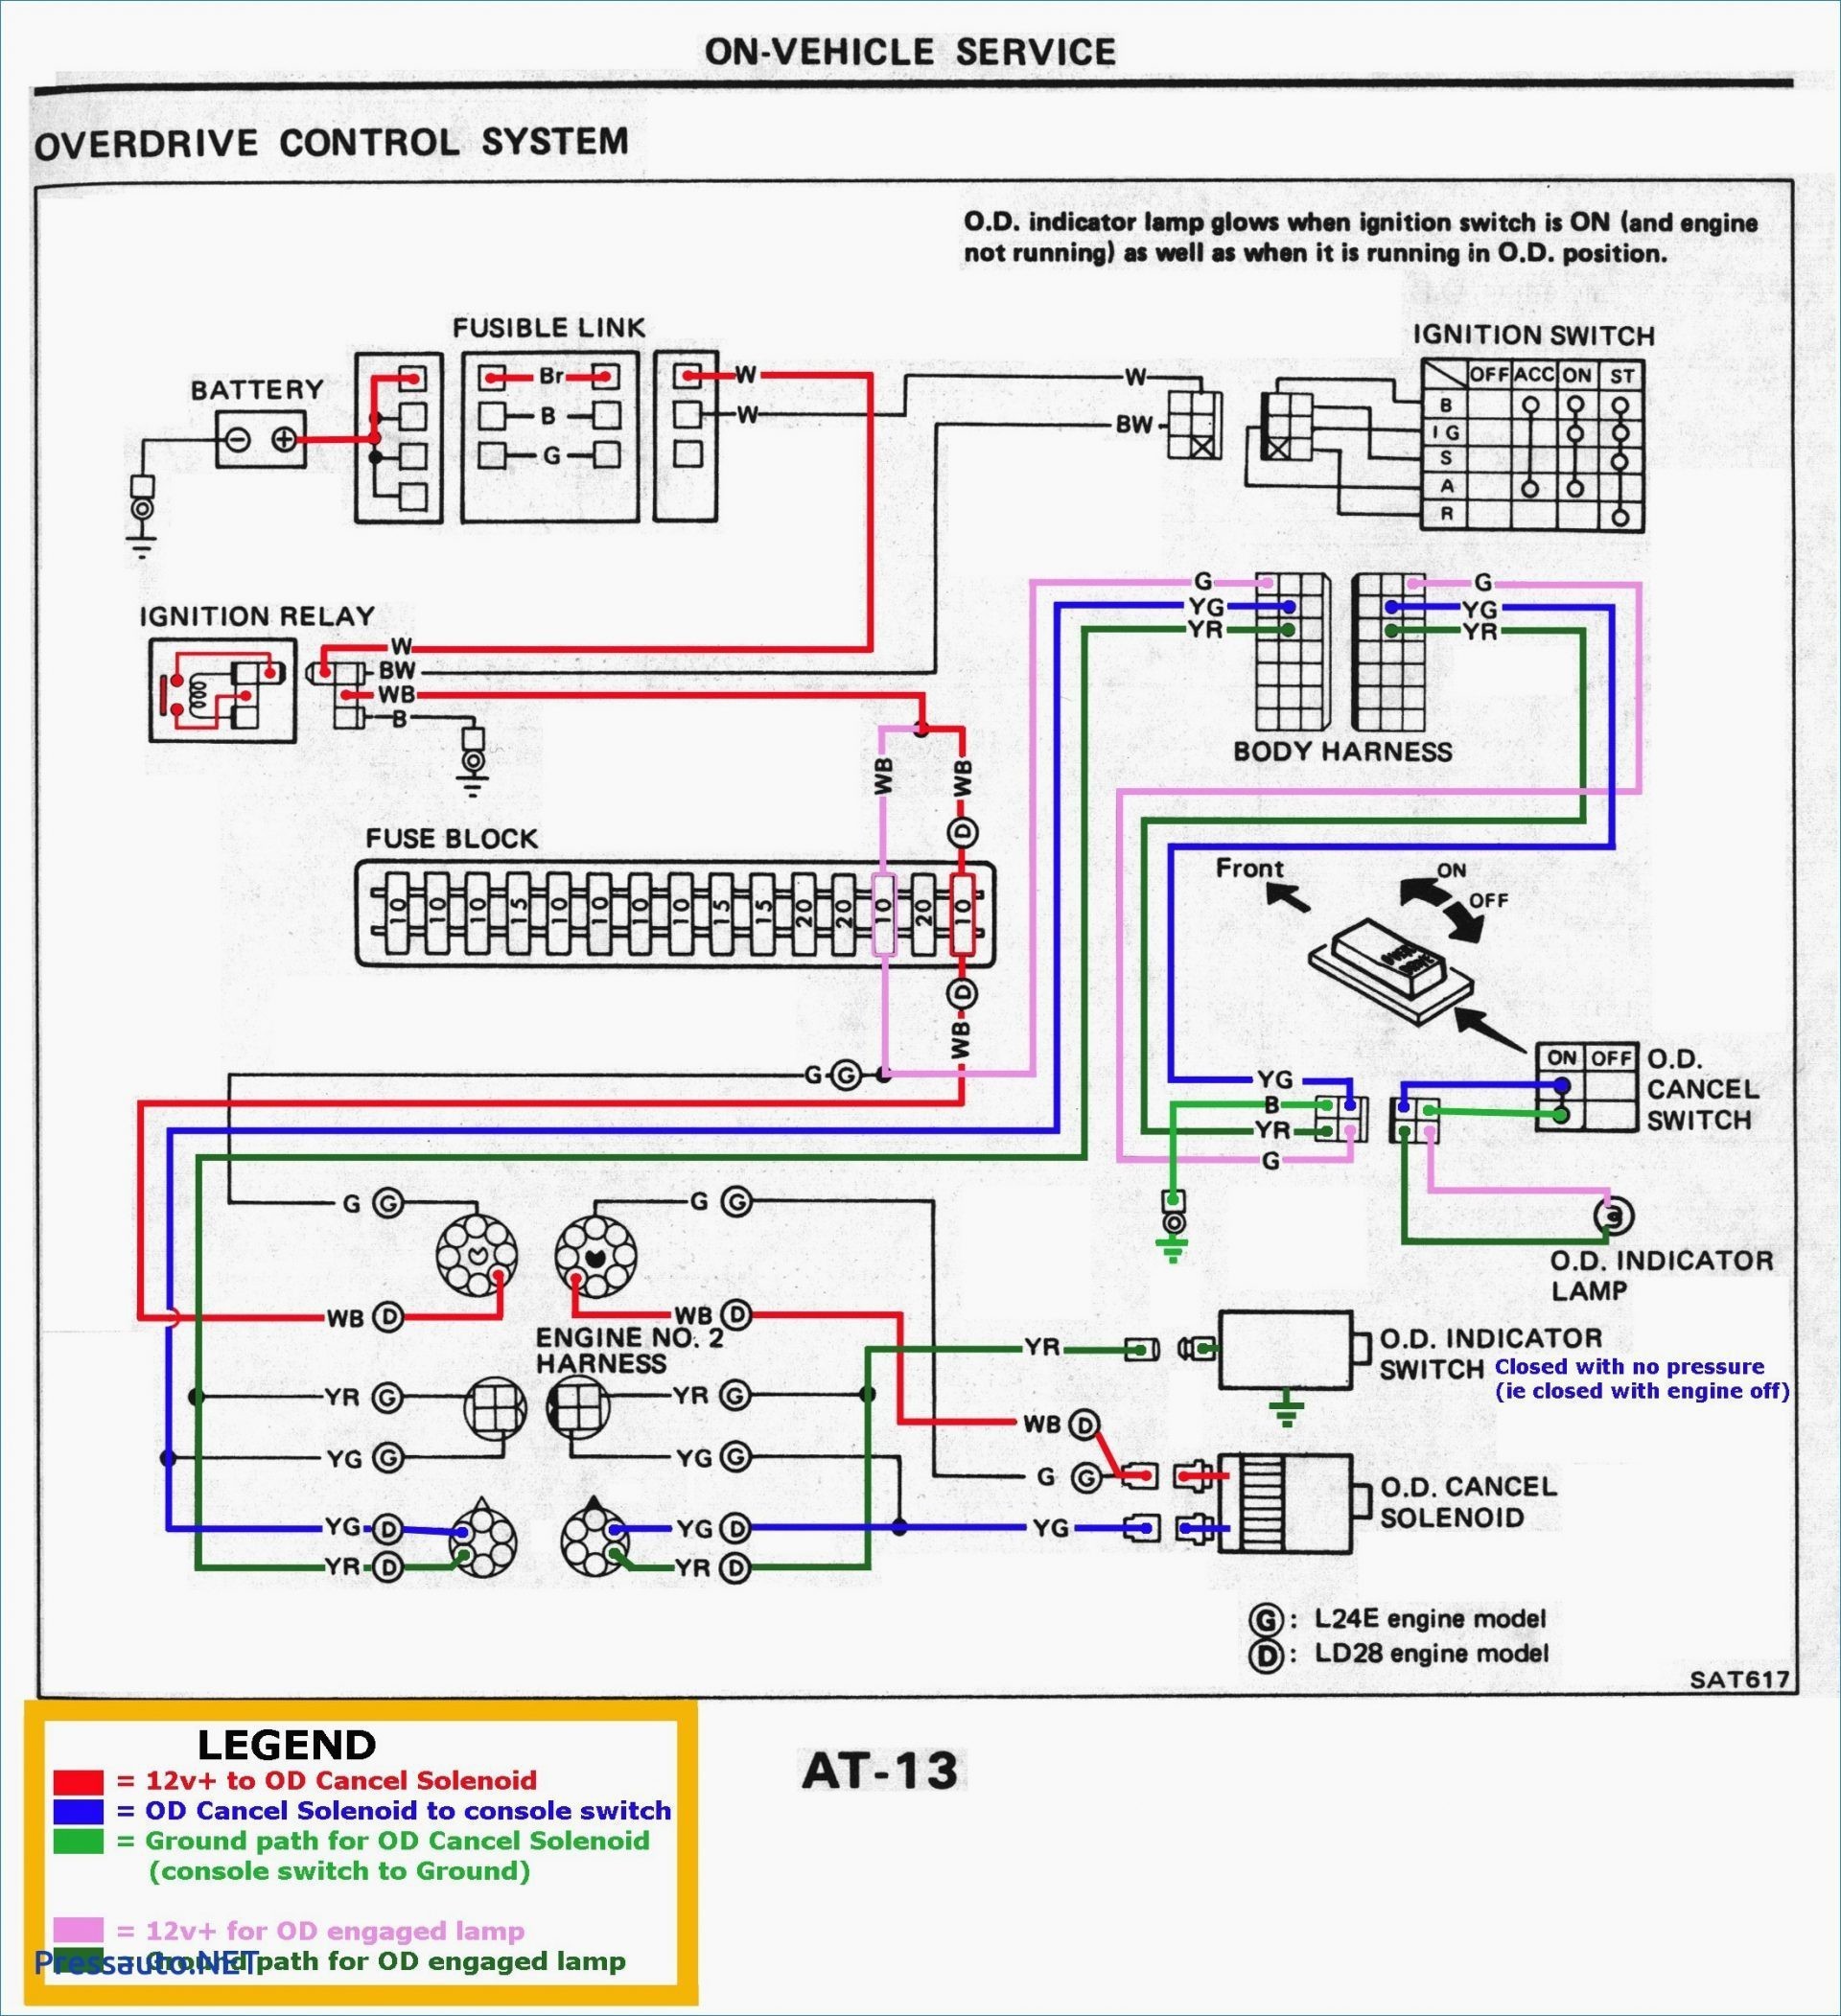 Car Lighting System Wiring Diagram Best Lamp Wiring Diagram • Electrical Outlet Symbol 2018